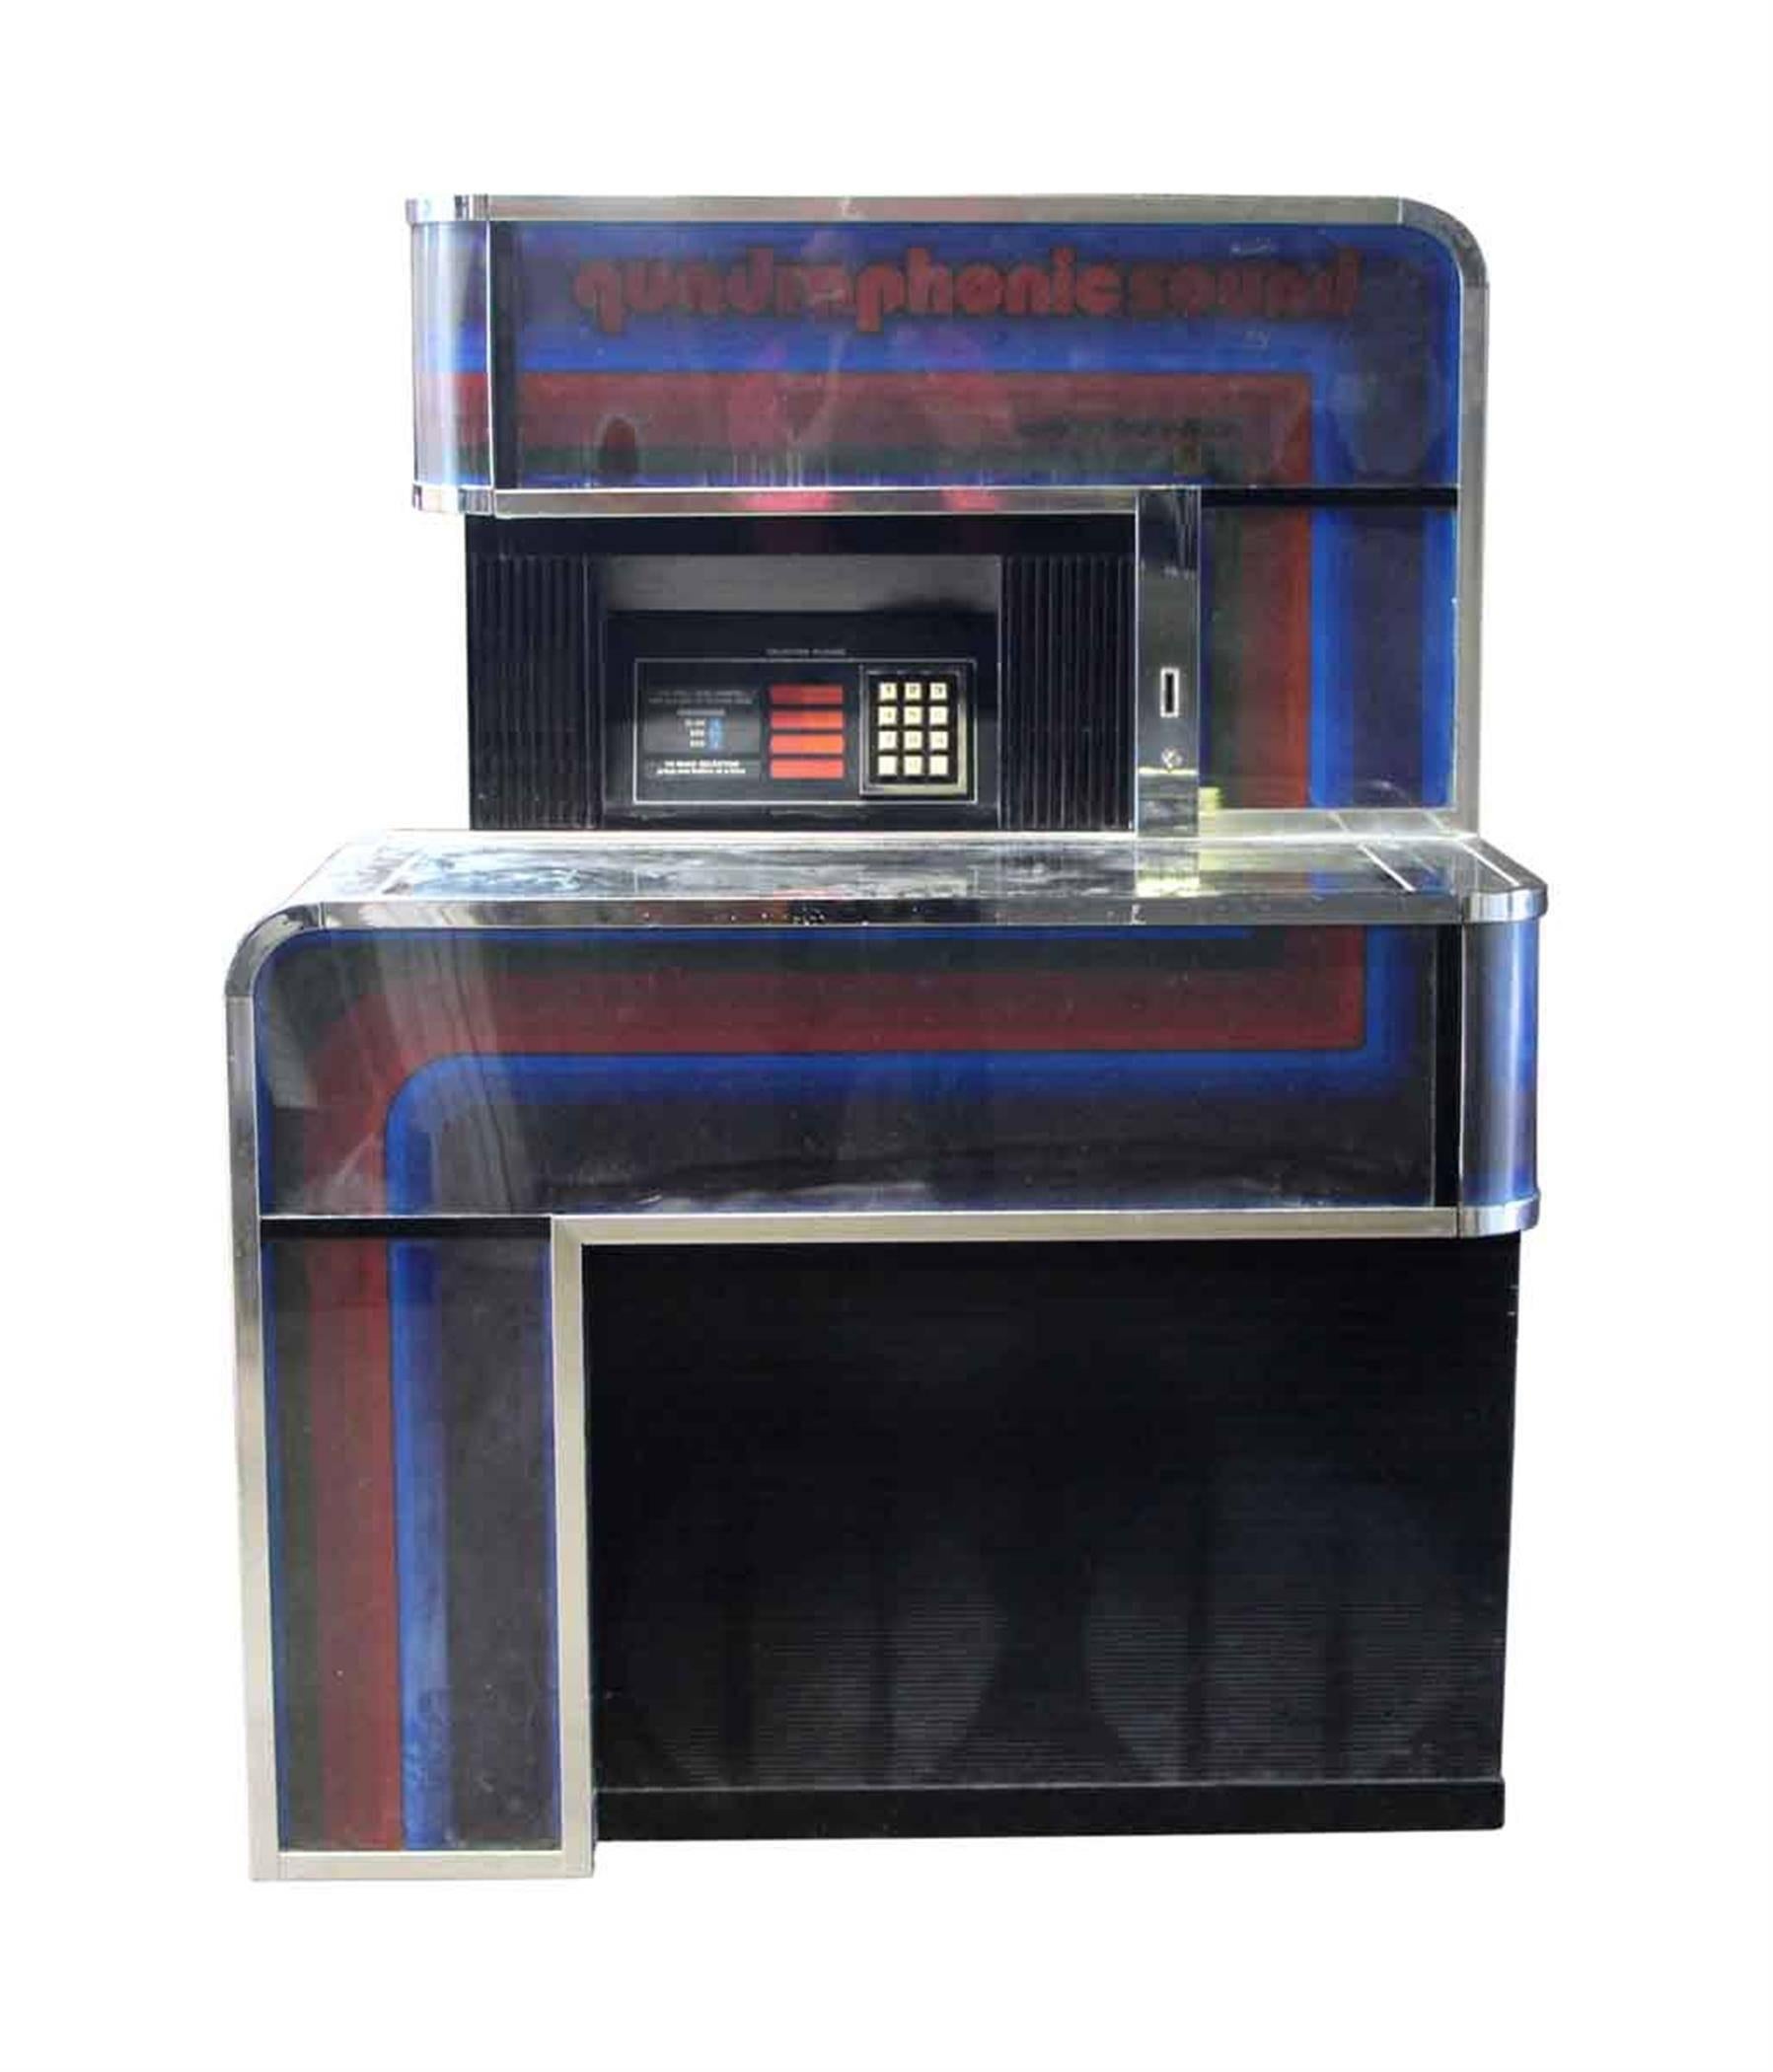 First edition 1974 Seeburg Quadraphonic sound digital jukebox in blue, red and black. Serial number 1563946. It has not been tested to see if it is in working condition. This can be seen at our 400 Gilligan St location in Scranton, PA.